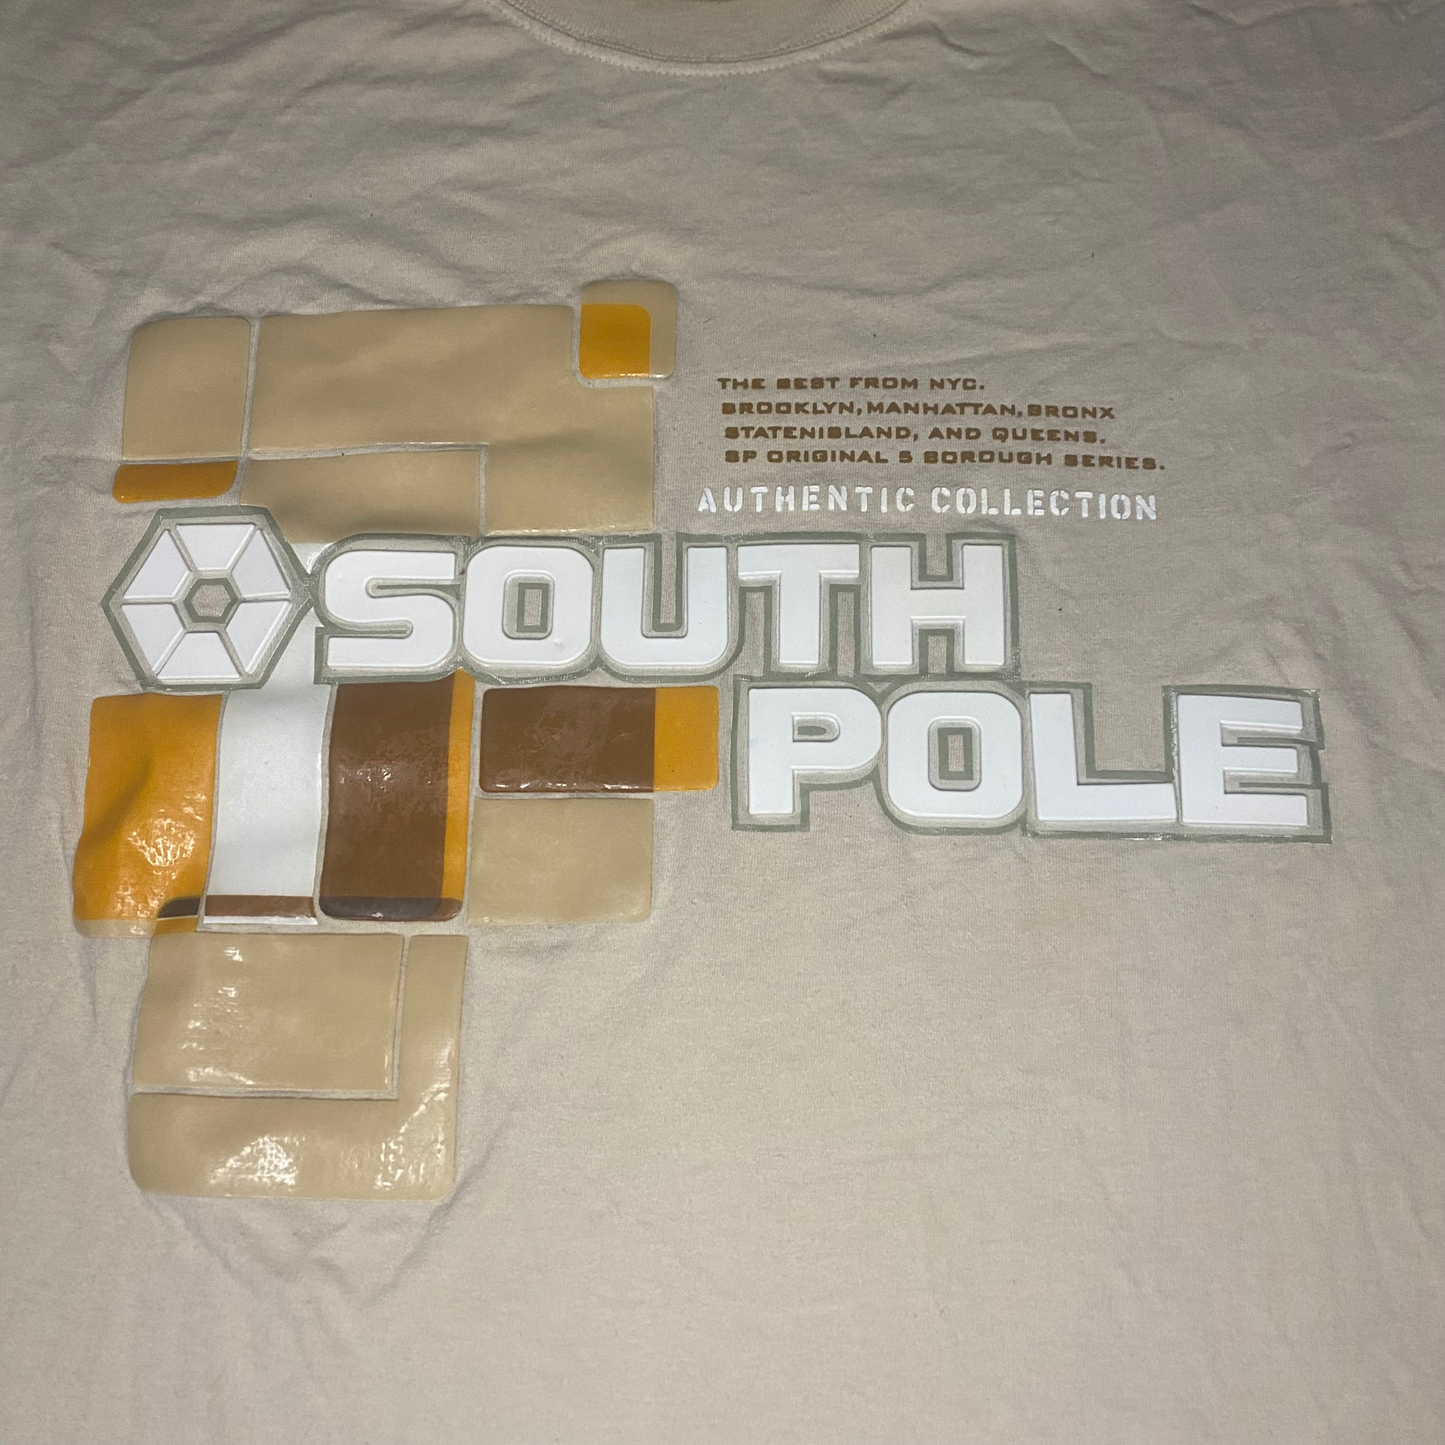 South Pole New York Authentic Collection Tee